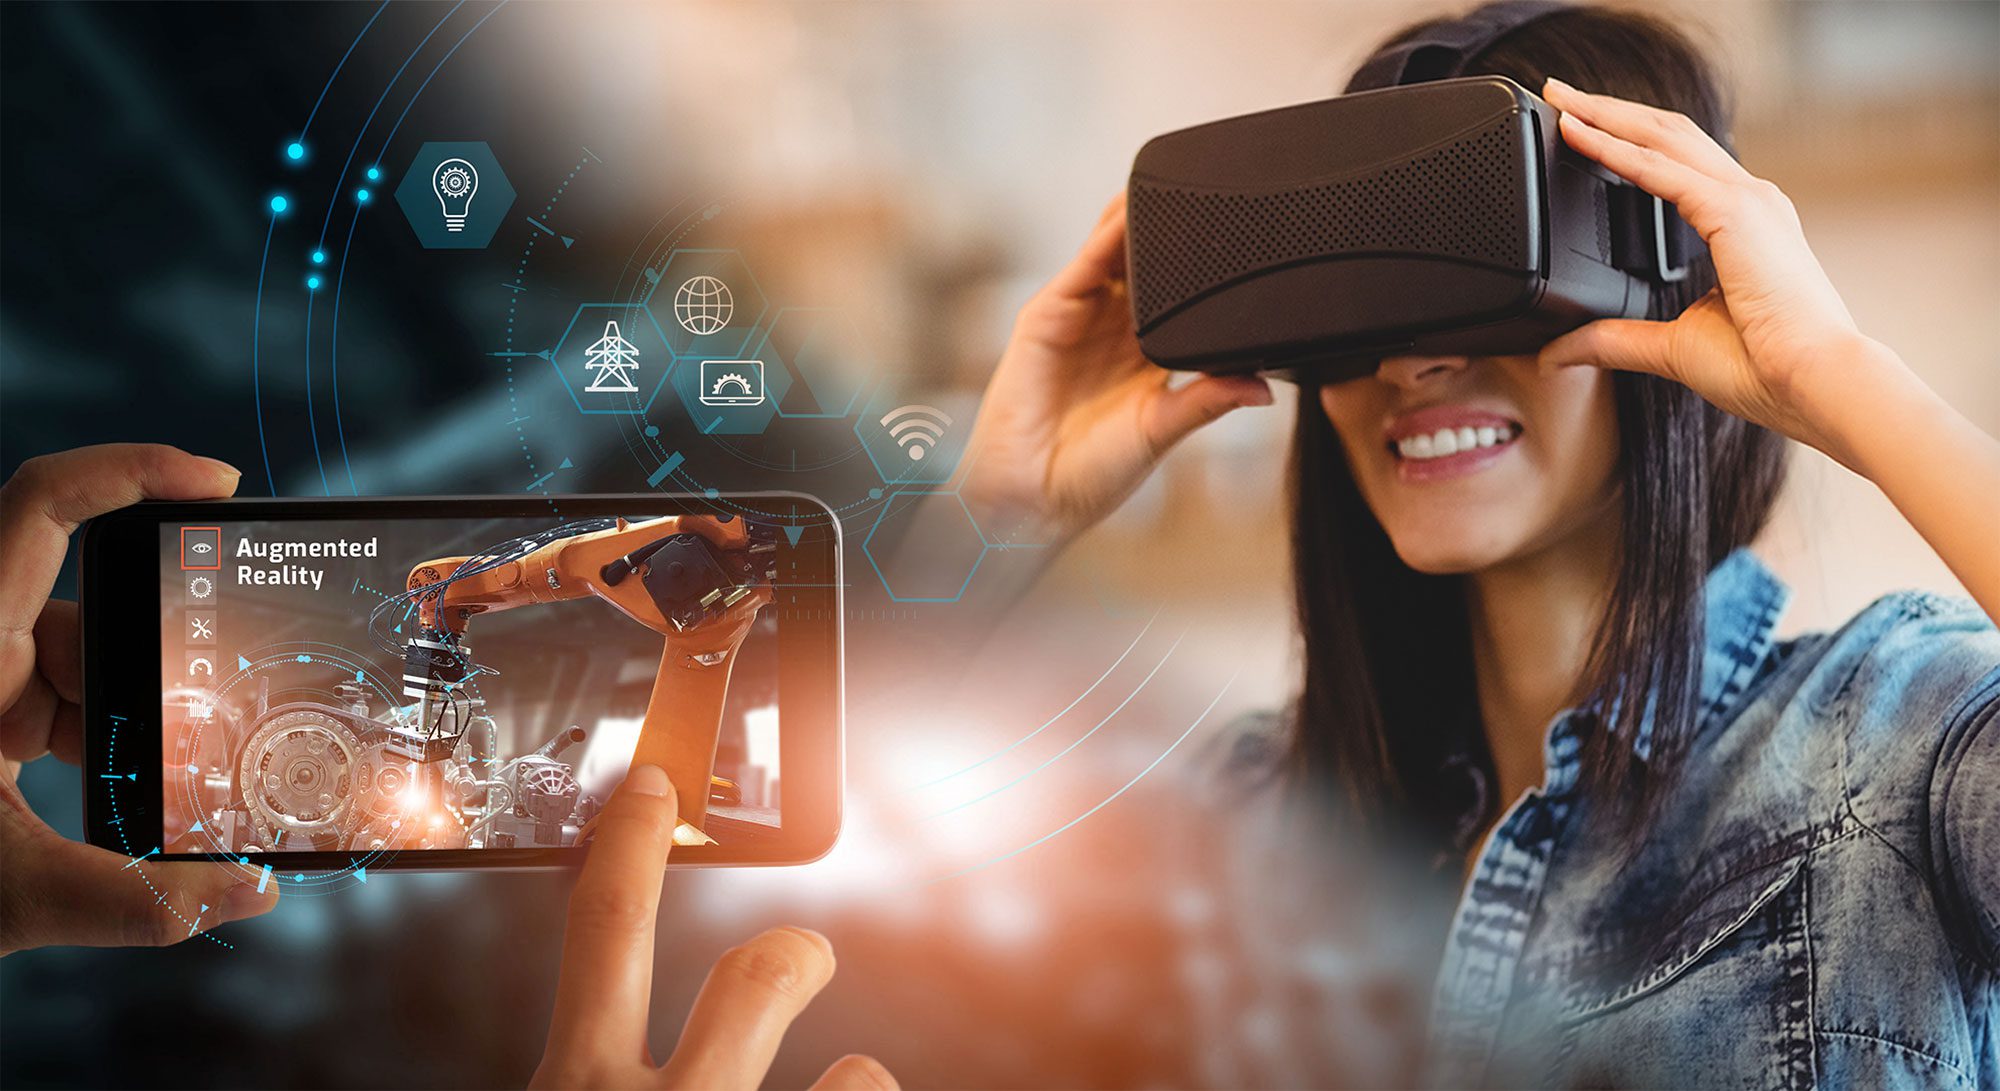 the future of smartphone technology ar and vr integration